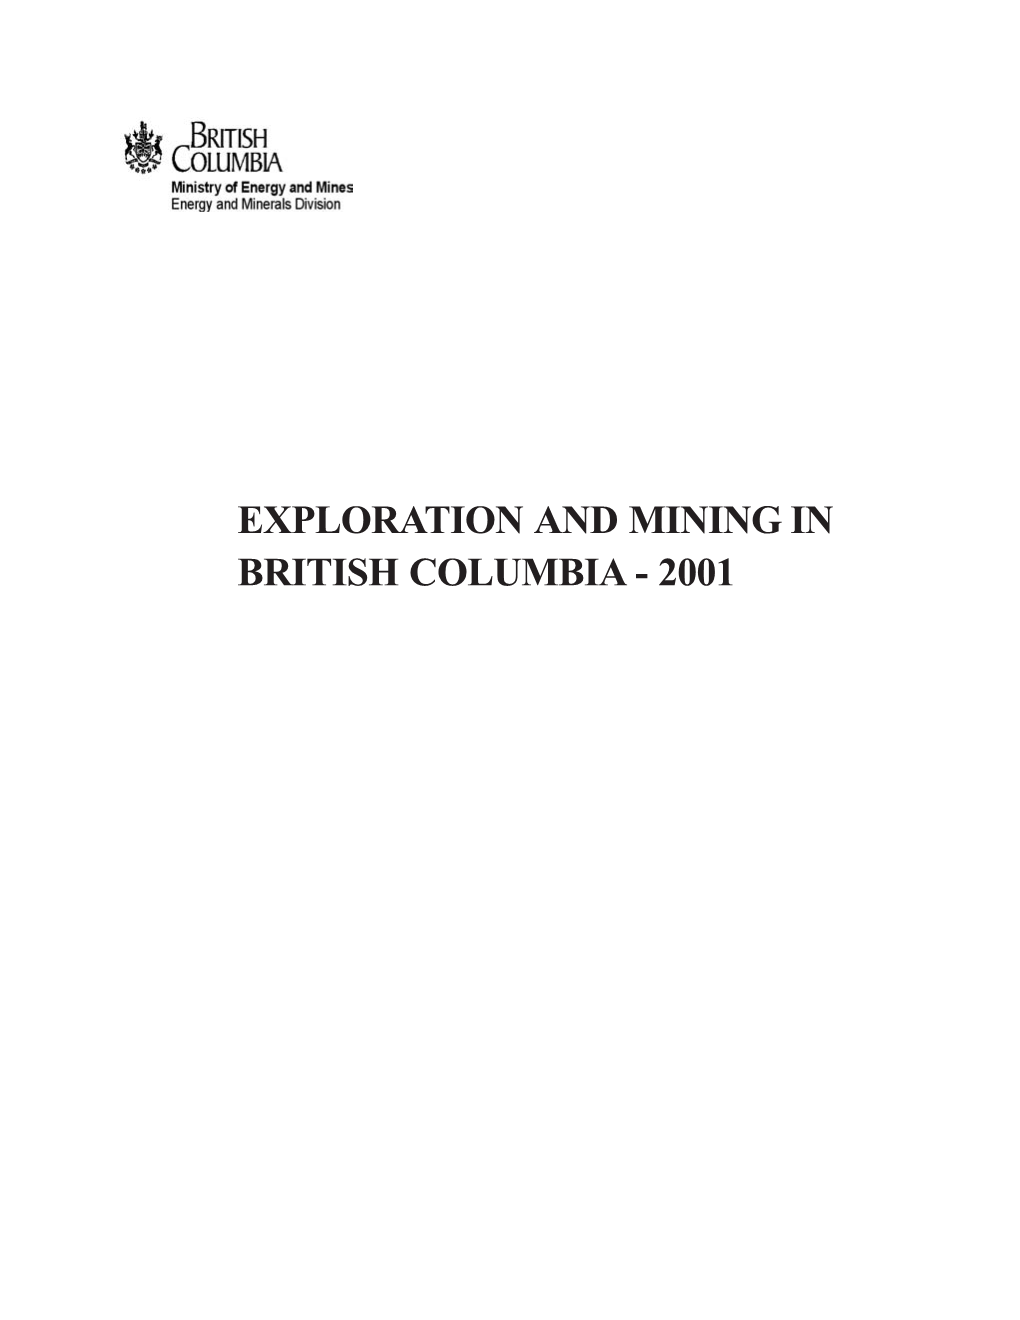 EXPLORATION and MINING in BRITISH COLUMBIA - 2001 Energy and Minerals Division